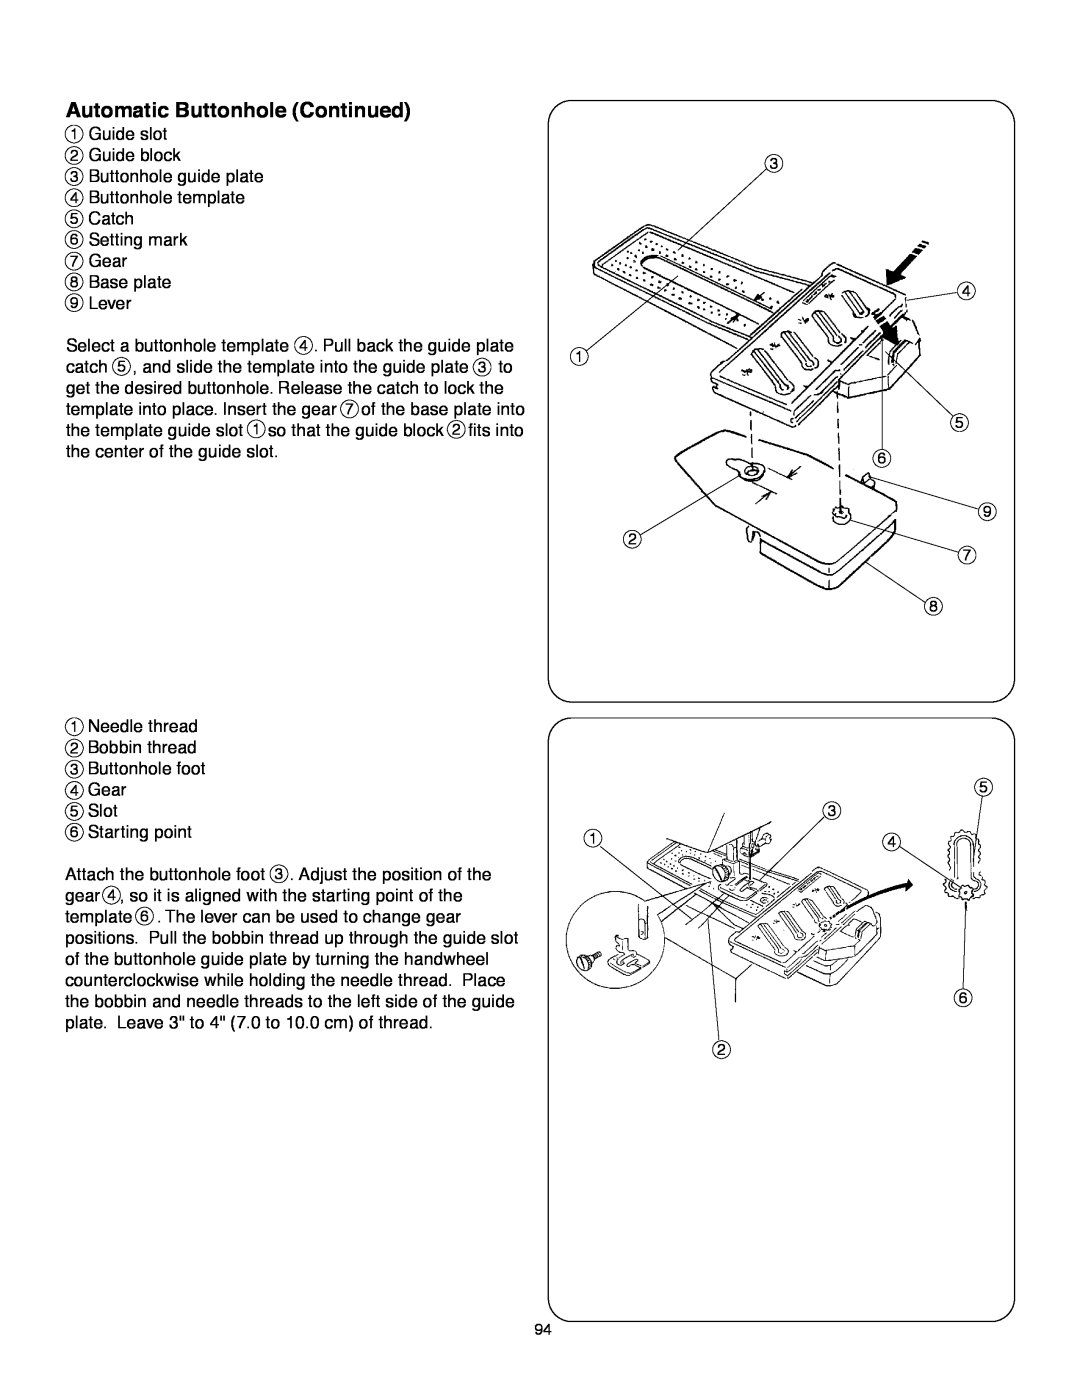 Janome MS-5027 instruction manual Automatic Buttonhole Continued, Guide slot 2 Guide block 3 Buttonhole guide plate 